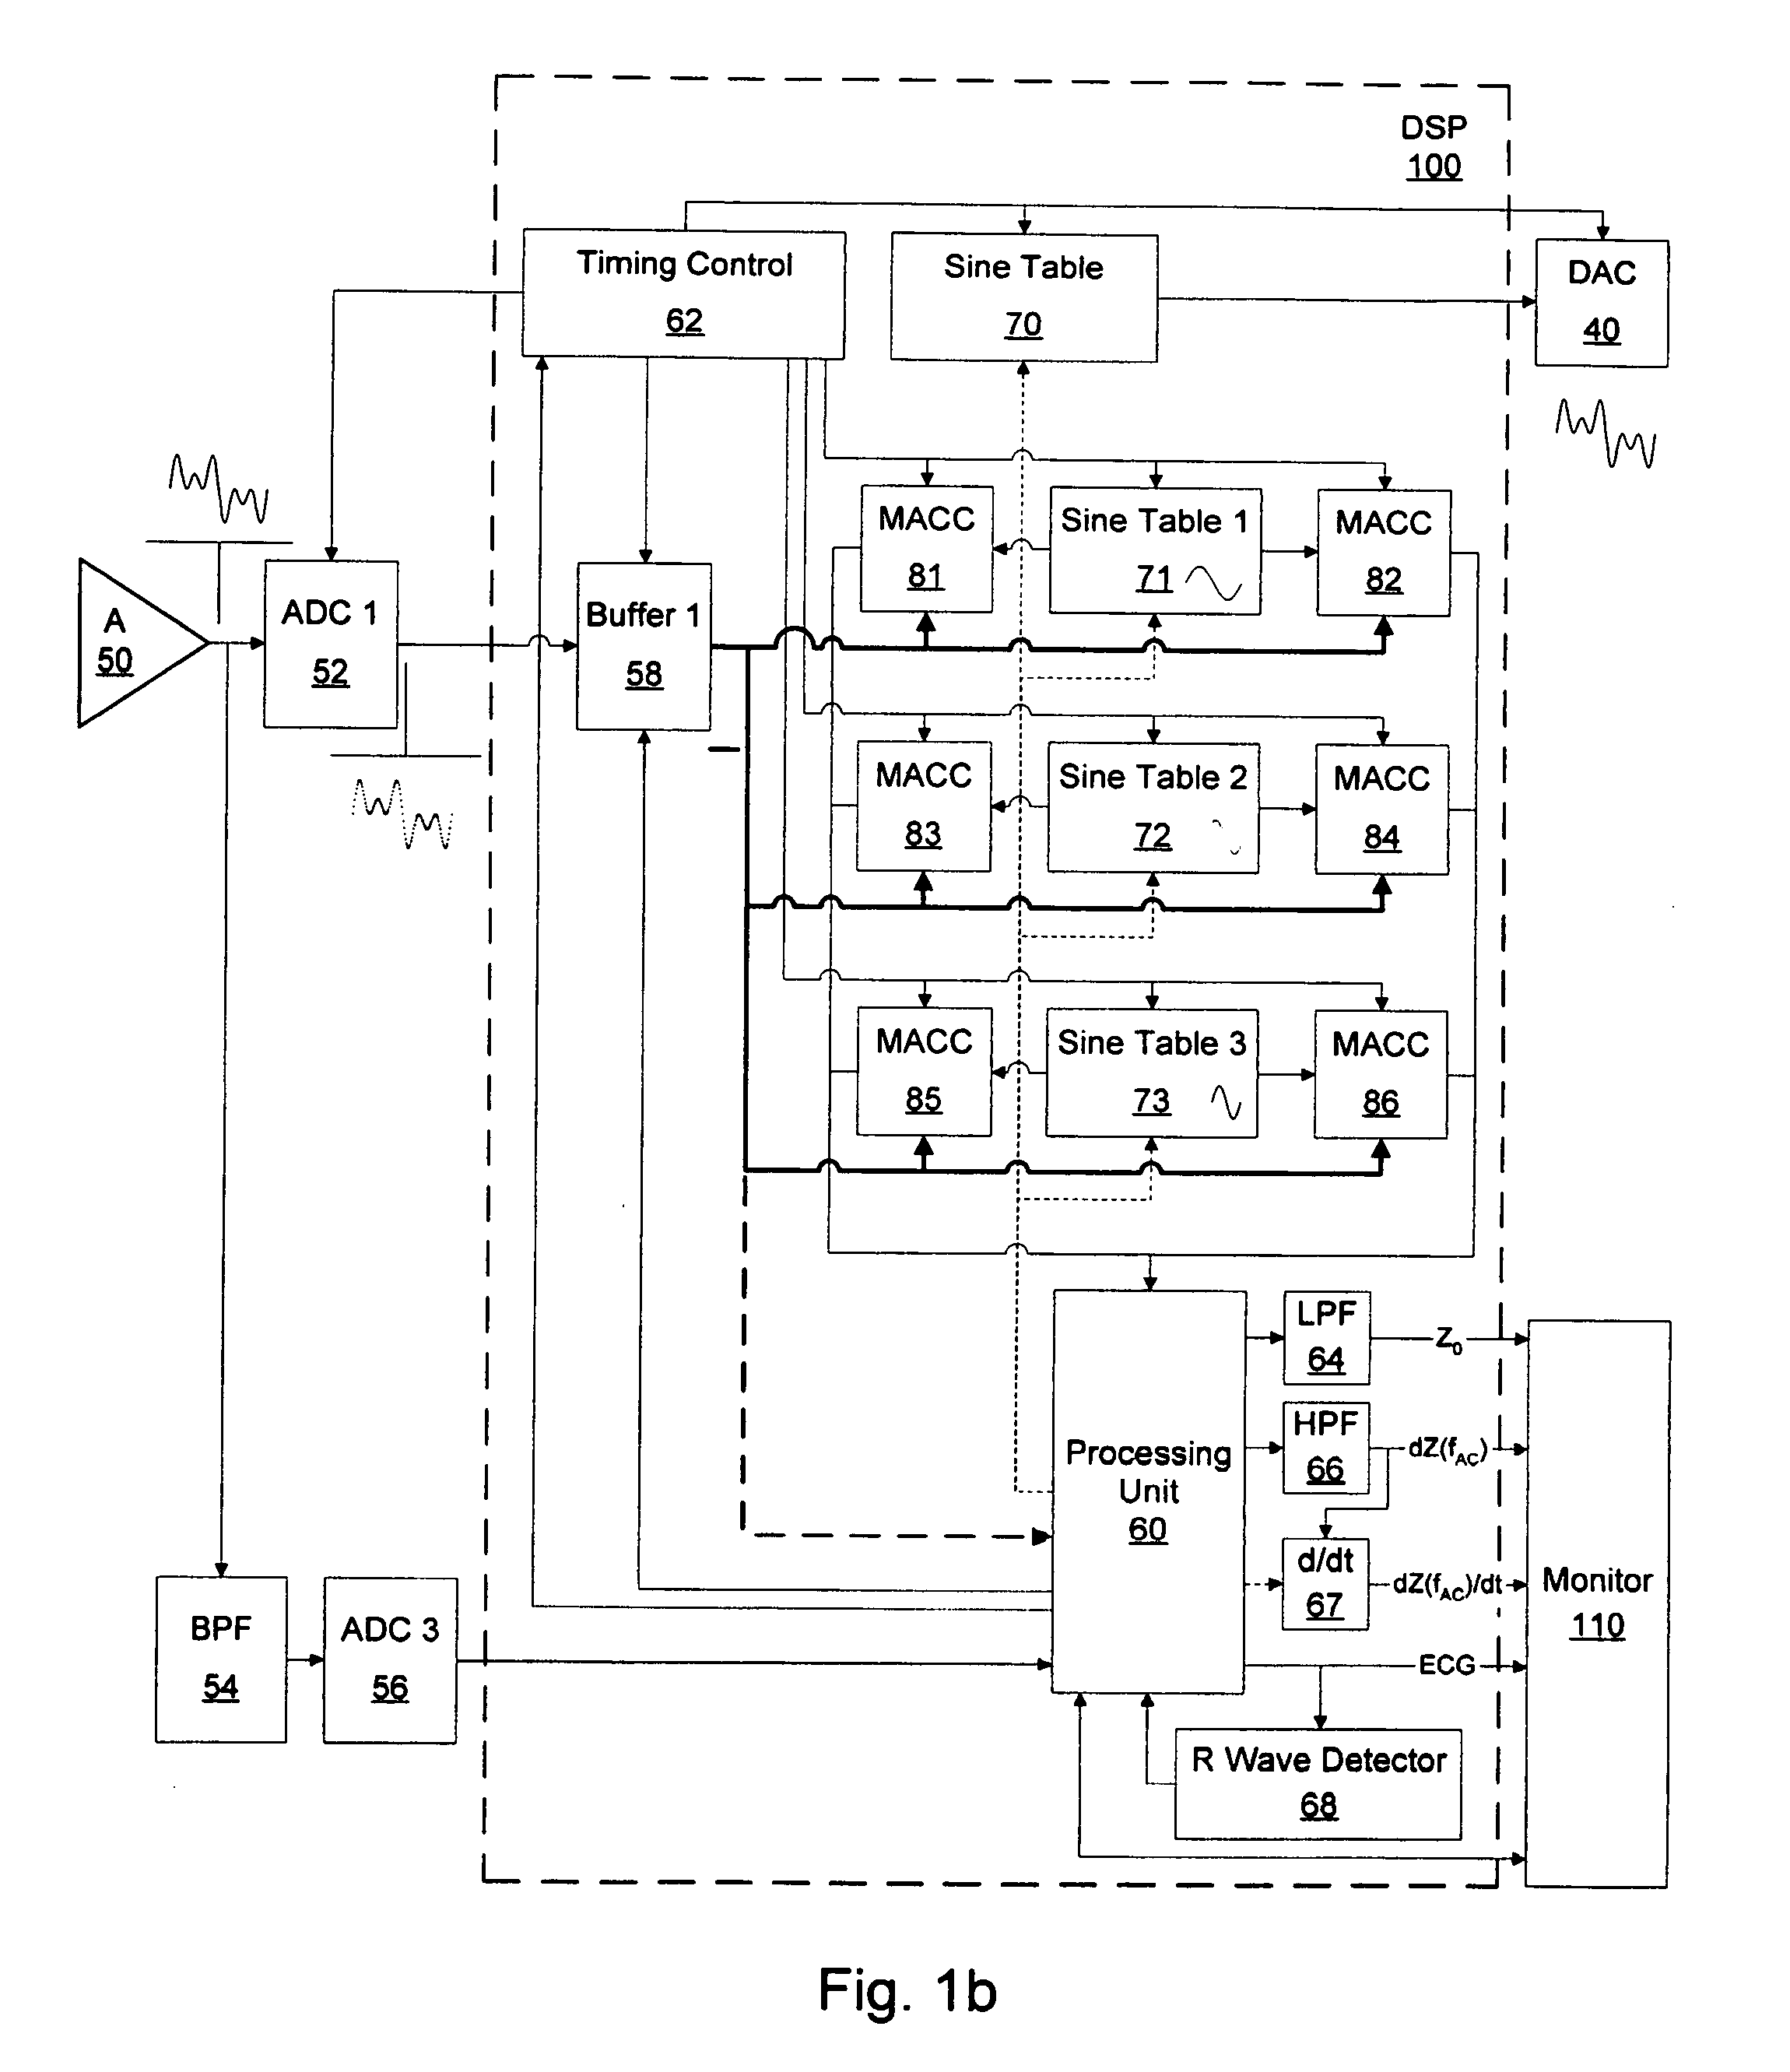 Method and apparatus for digital demodulation and further processing of signals obtained in the measurement of electrical bioimpedance or bioadmittance in an object